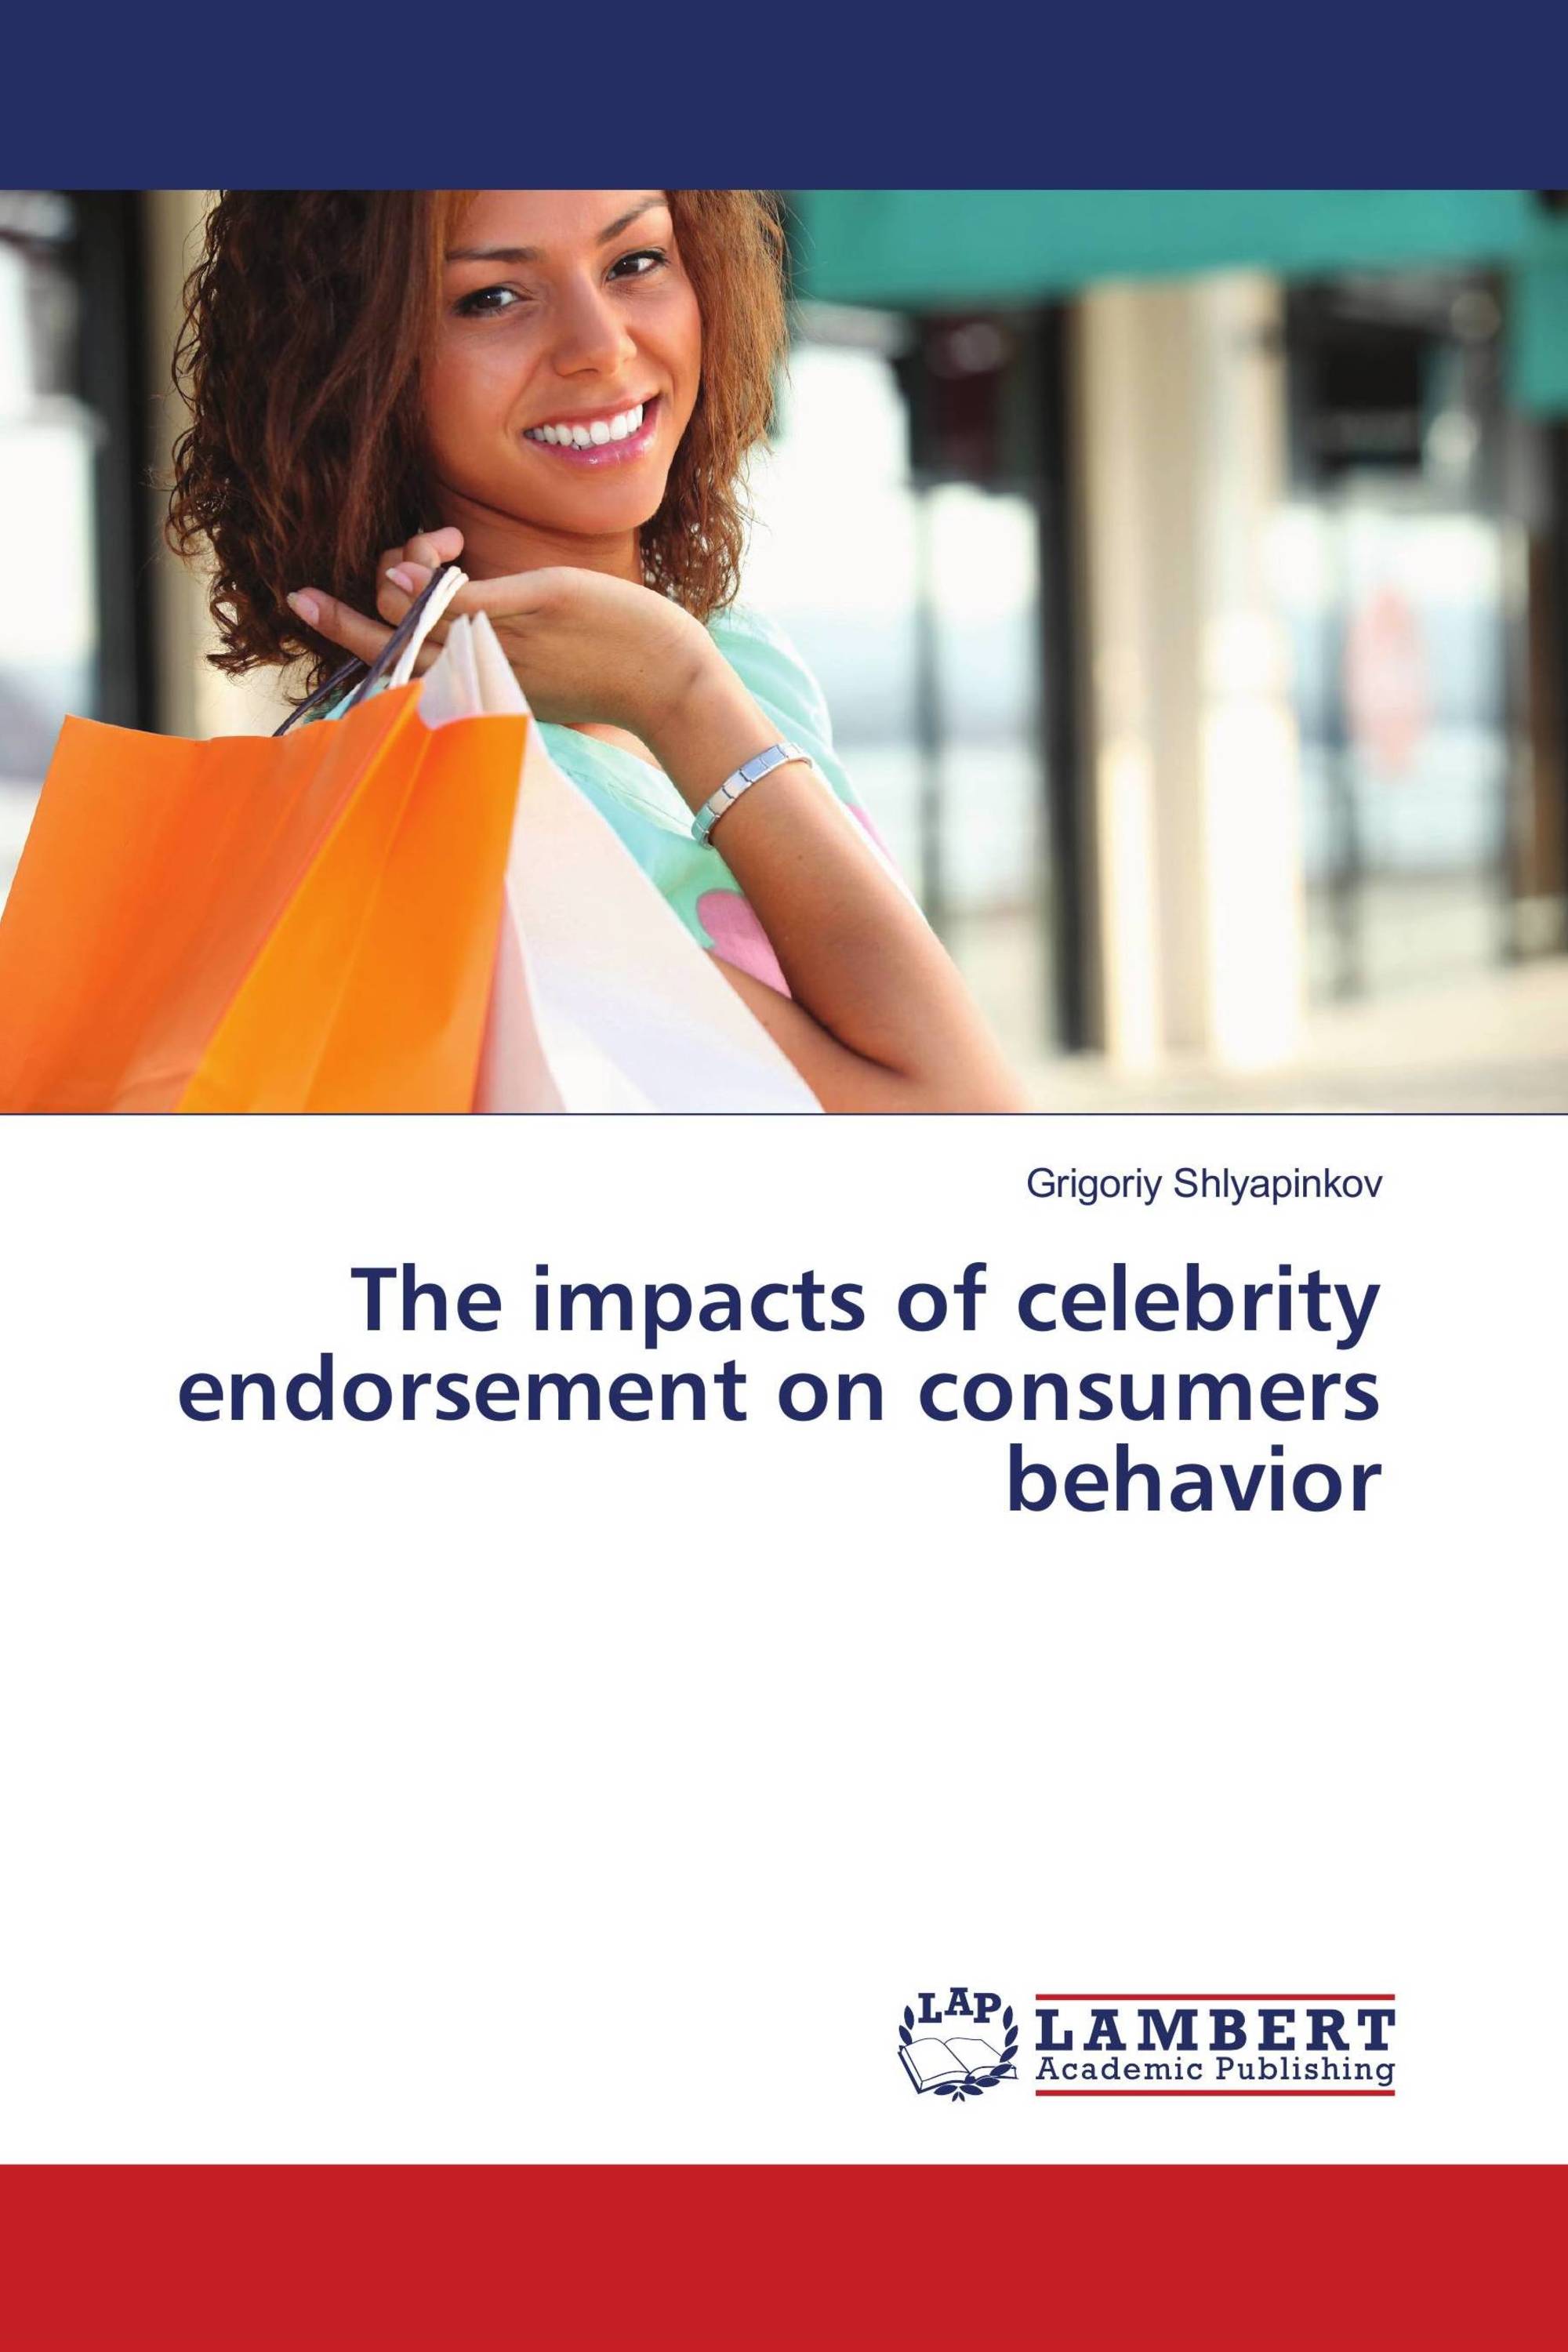 research paper on impact of celebrity endorsement on consumer buying behaviour